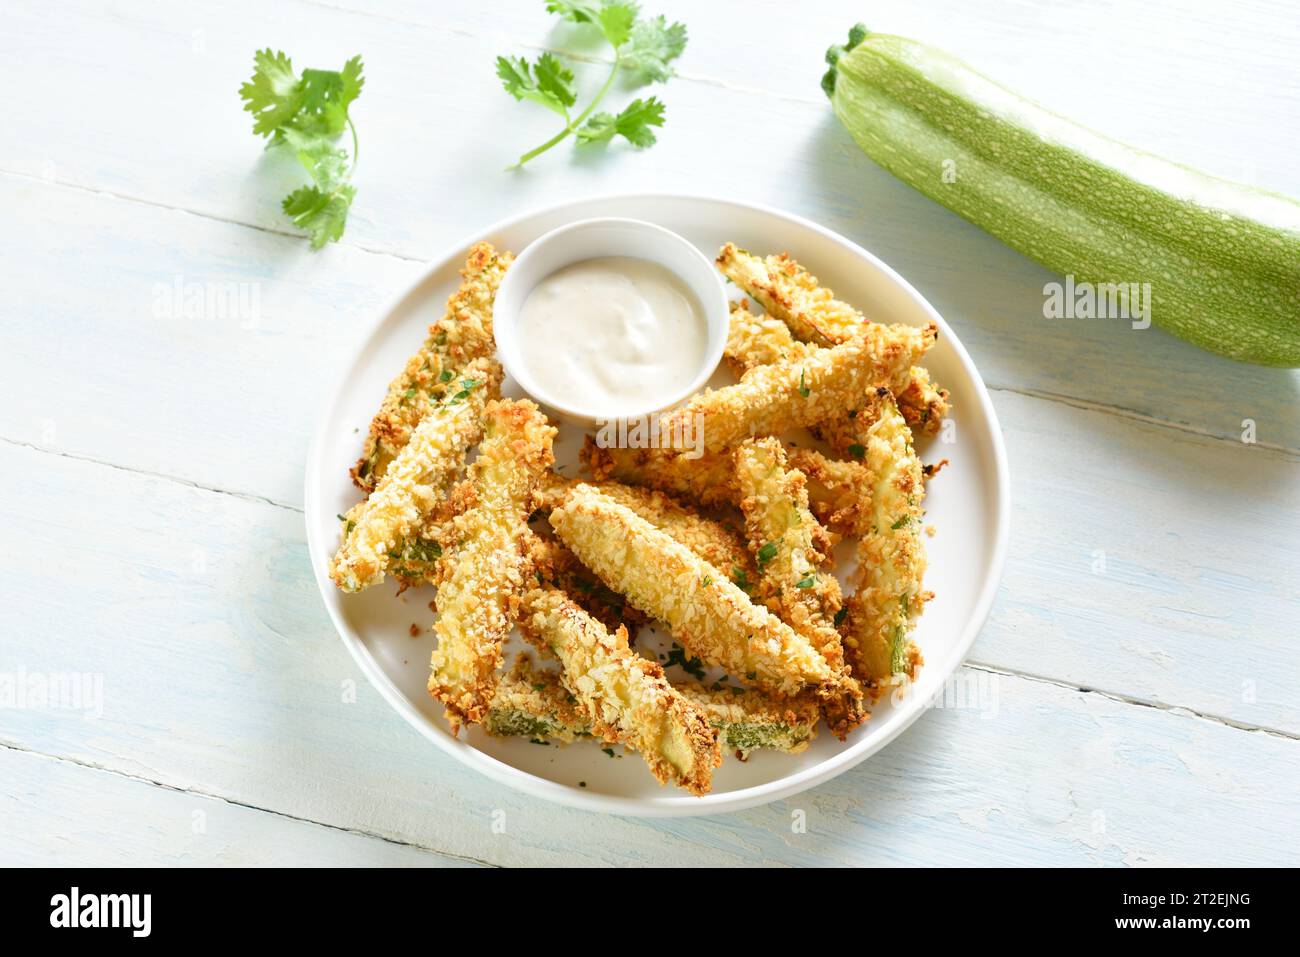 Homemade zucchini fries with dipping sauce on plate over light wooden background. Close up view Stock Photo